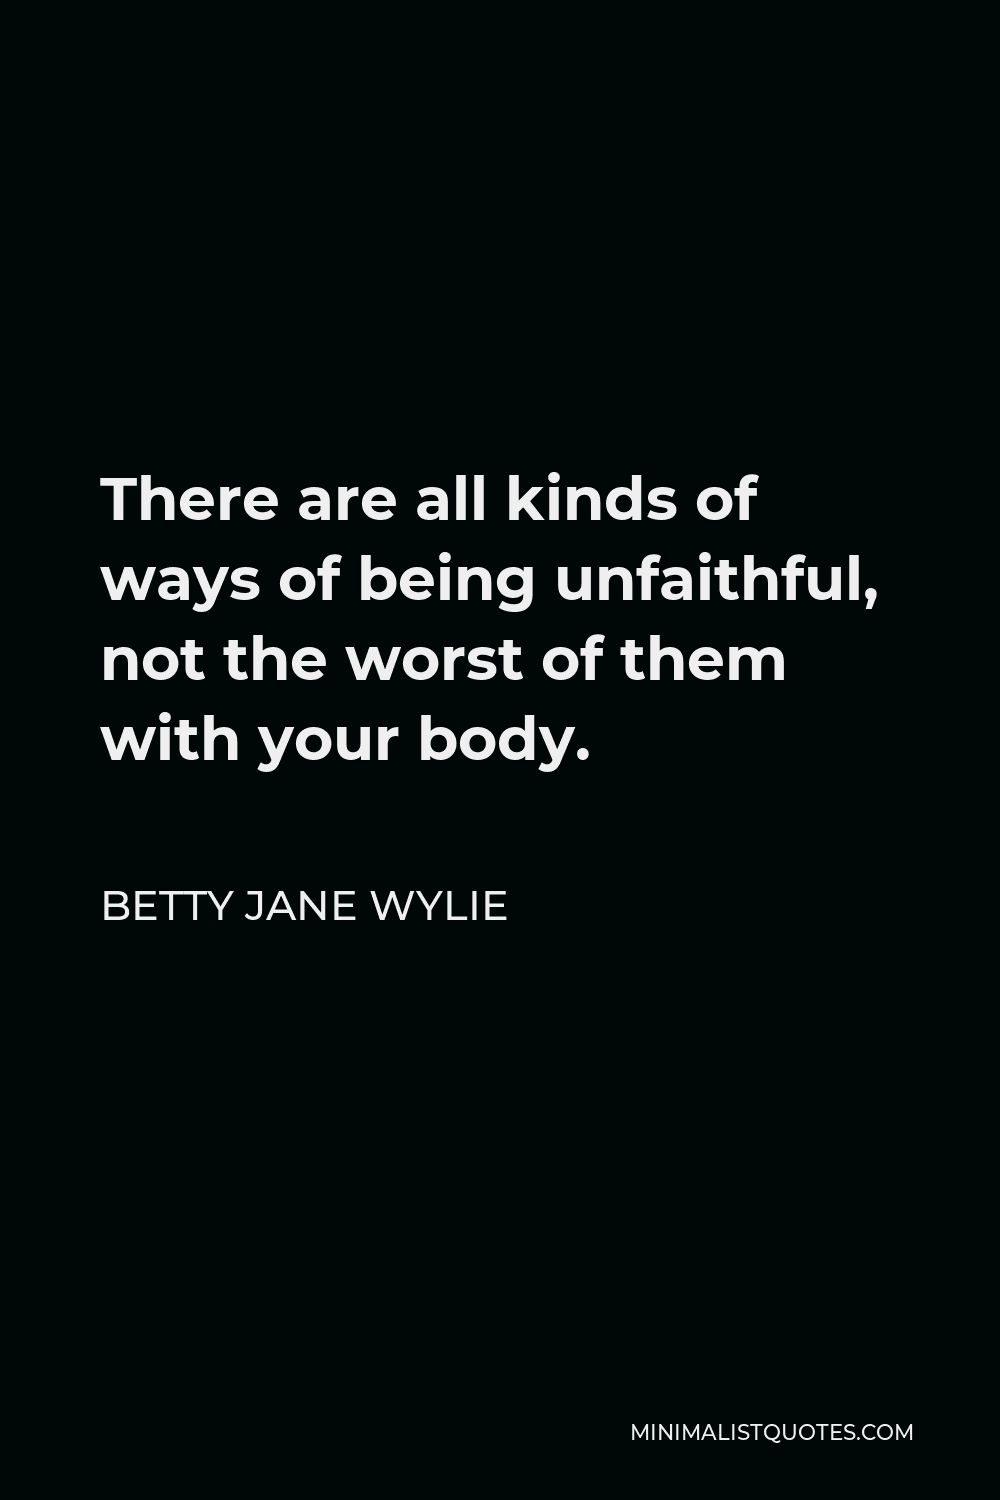 Betty Jane Wylie Quote - There are all kinds of ways of being unfaithful, not the worst of them with your body.